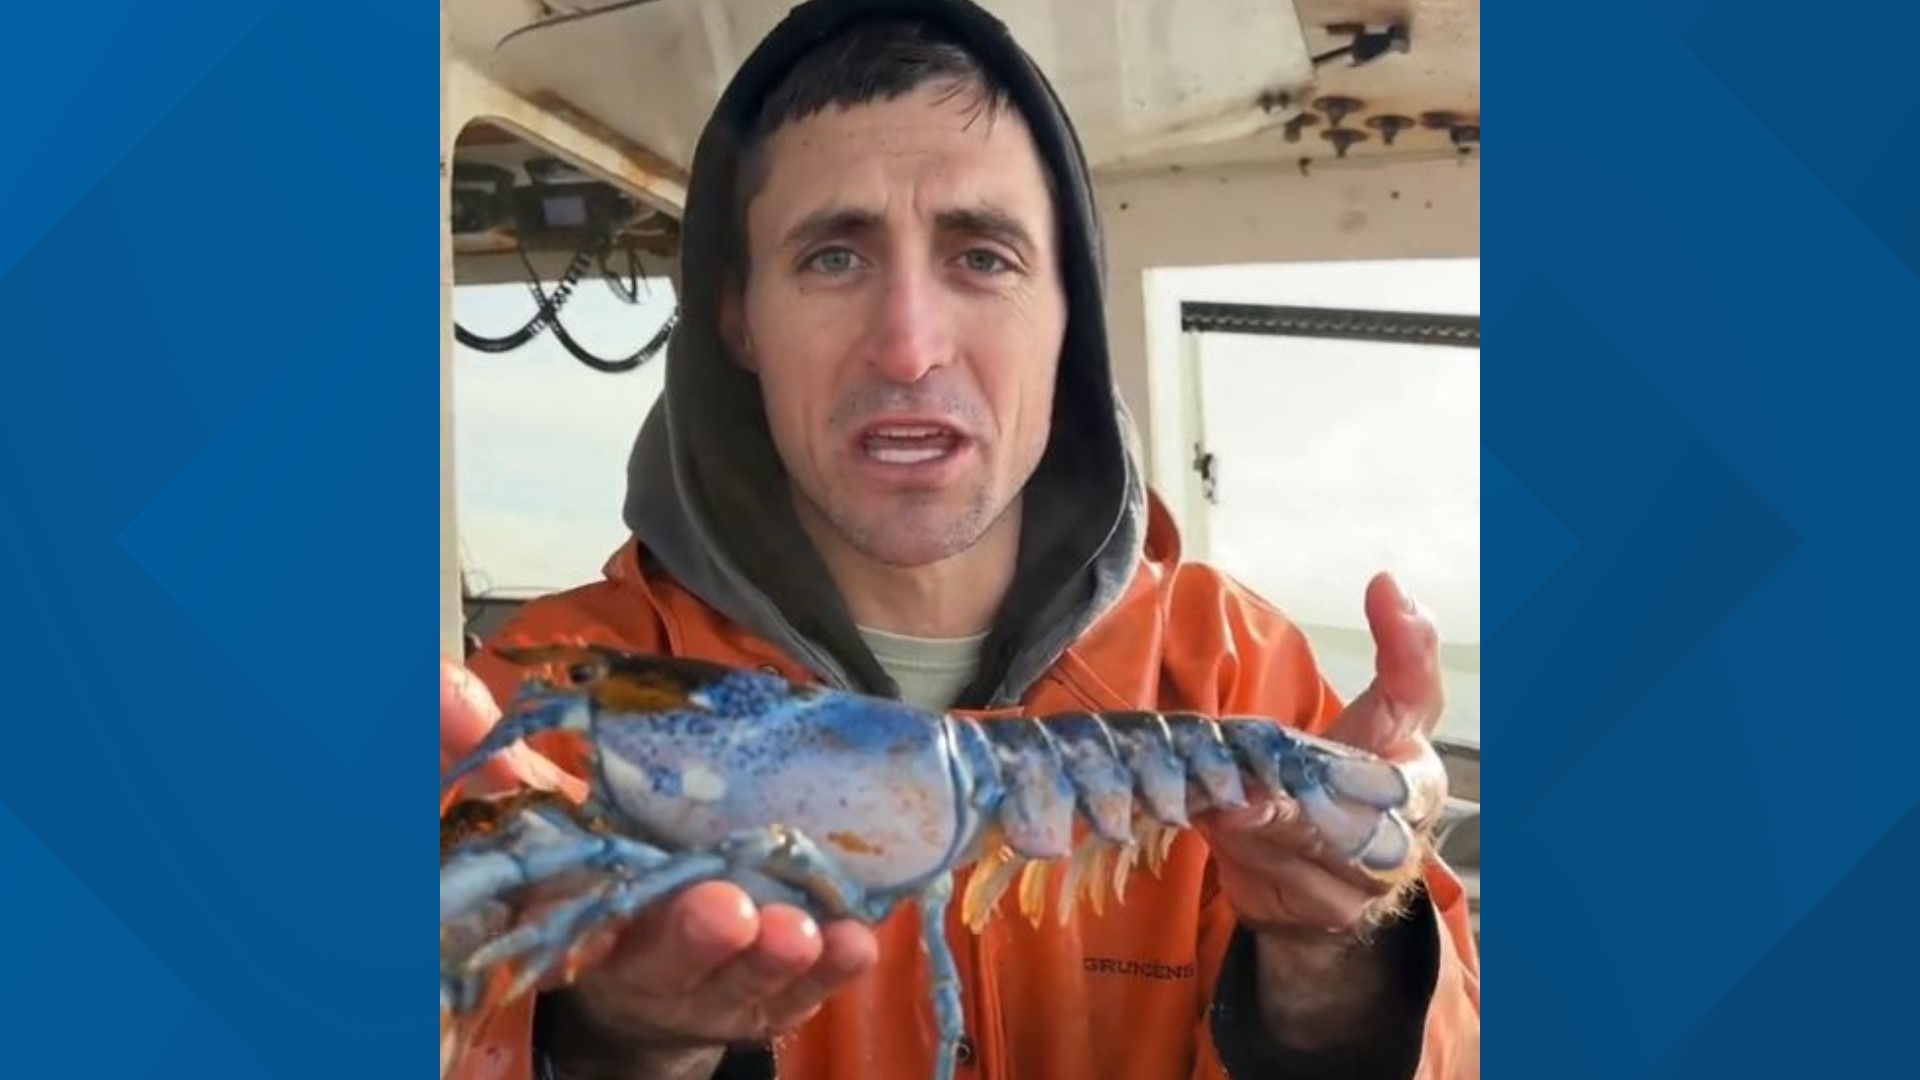 Maine lobsterman Jacob Knowles made a big decision about the world's rarest lobster named Bowie.